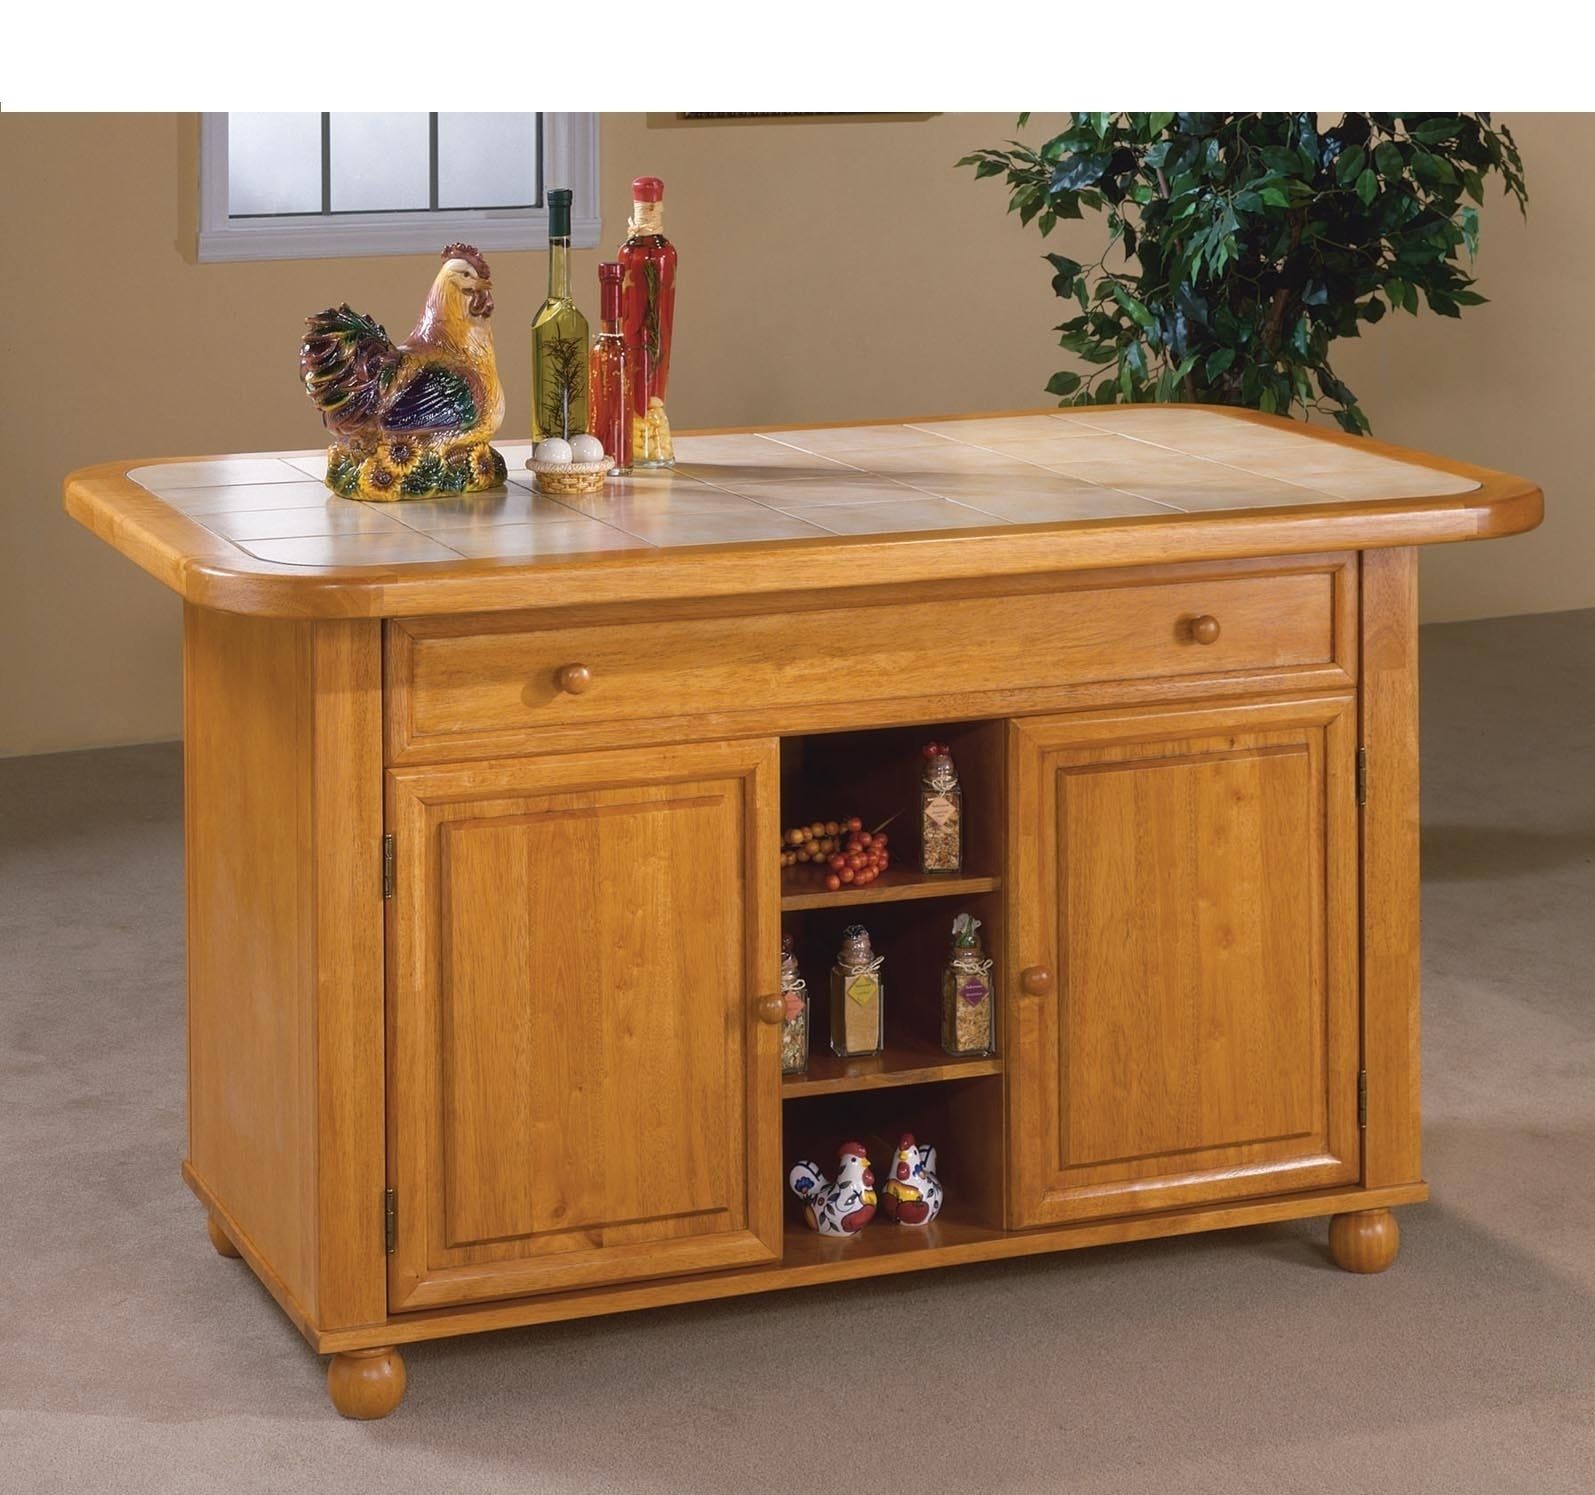 Loon Peak Lockwood Kitchen Island With Ceramic Tile Top & Reviews With Regard To 2018 Lockwood Sideboards (View 3 of 20)